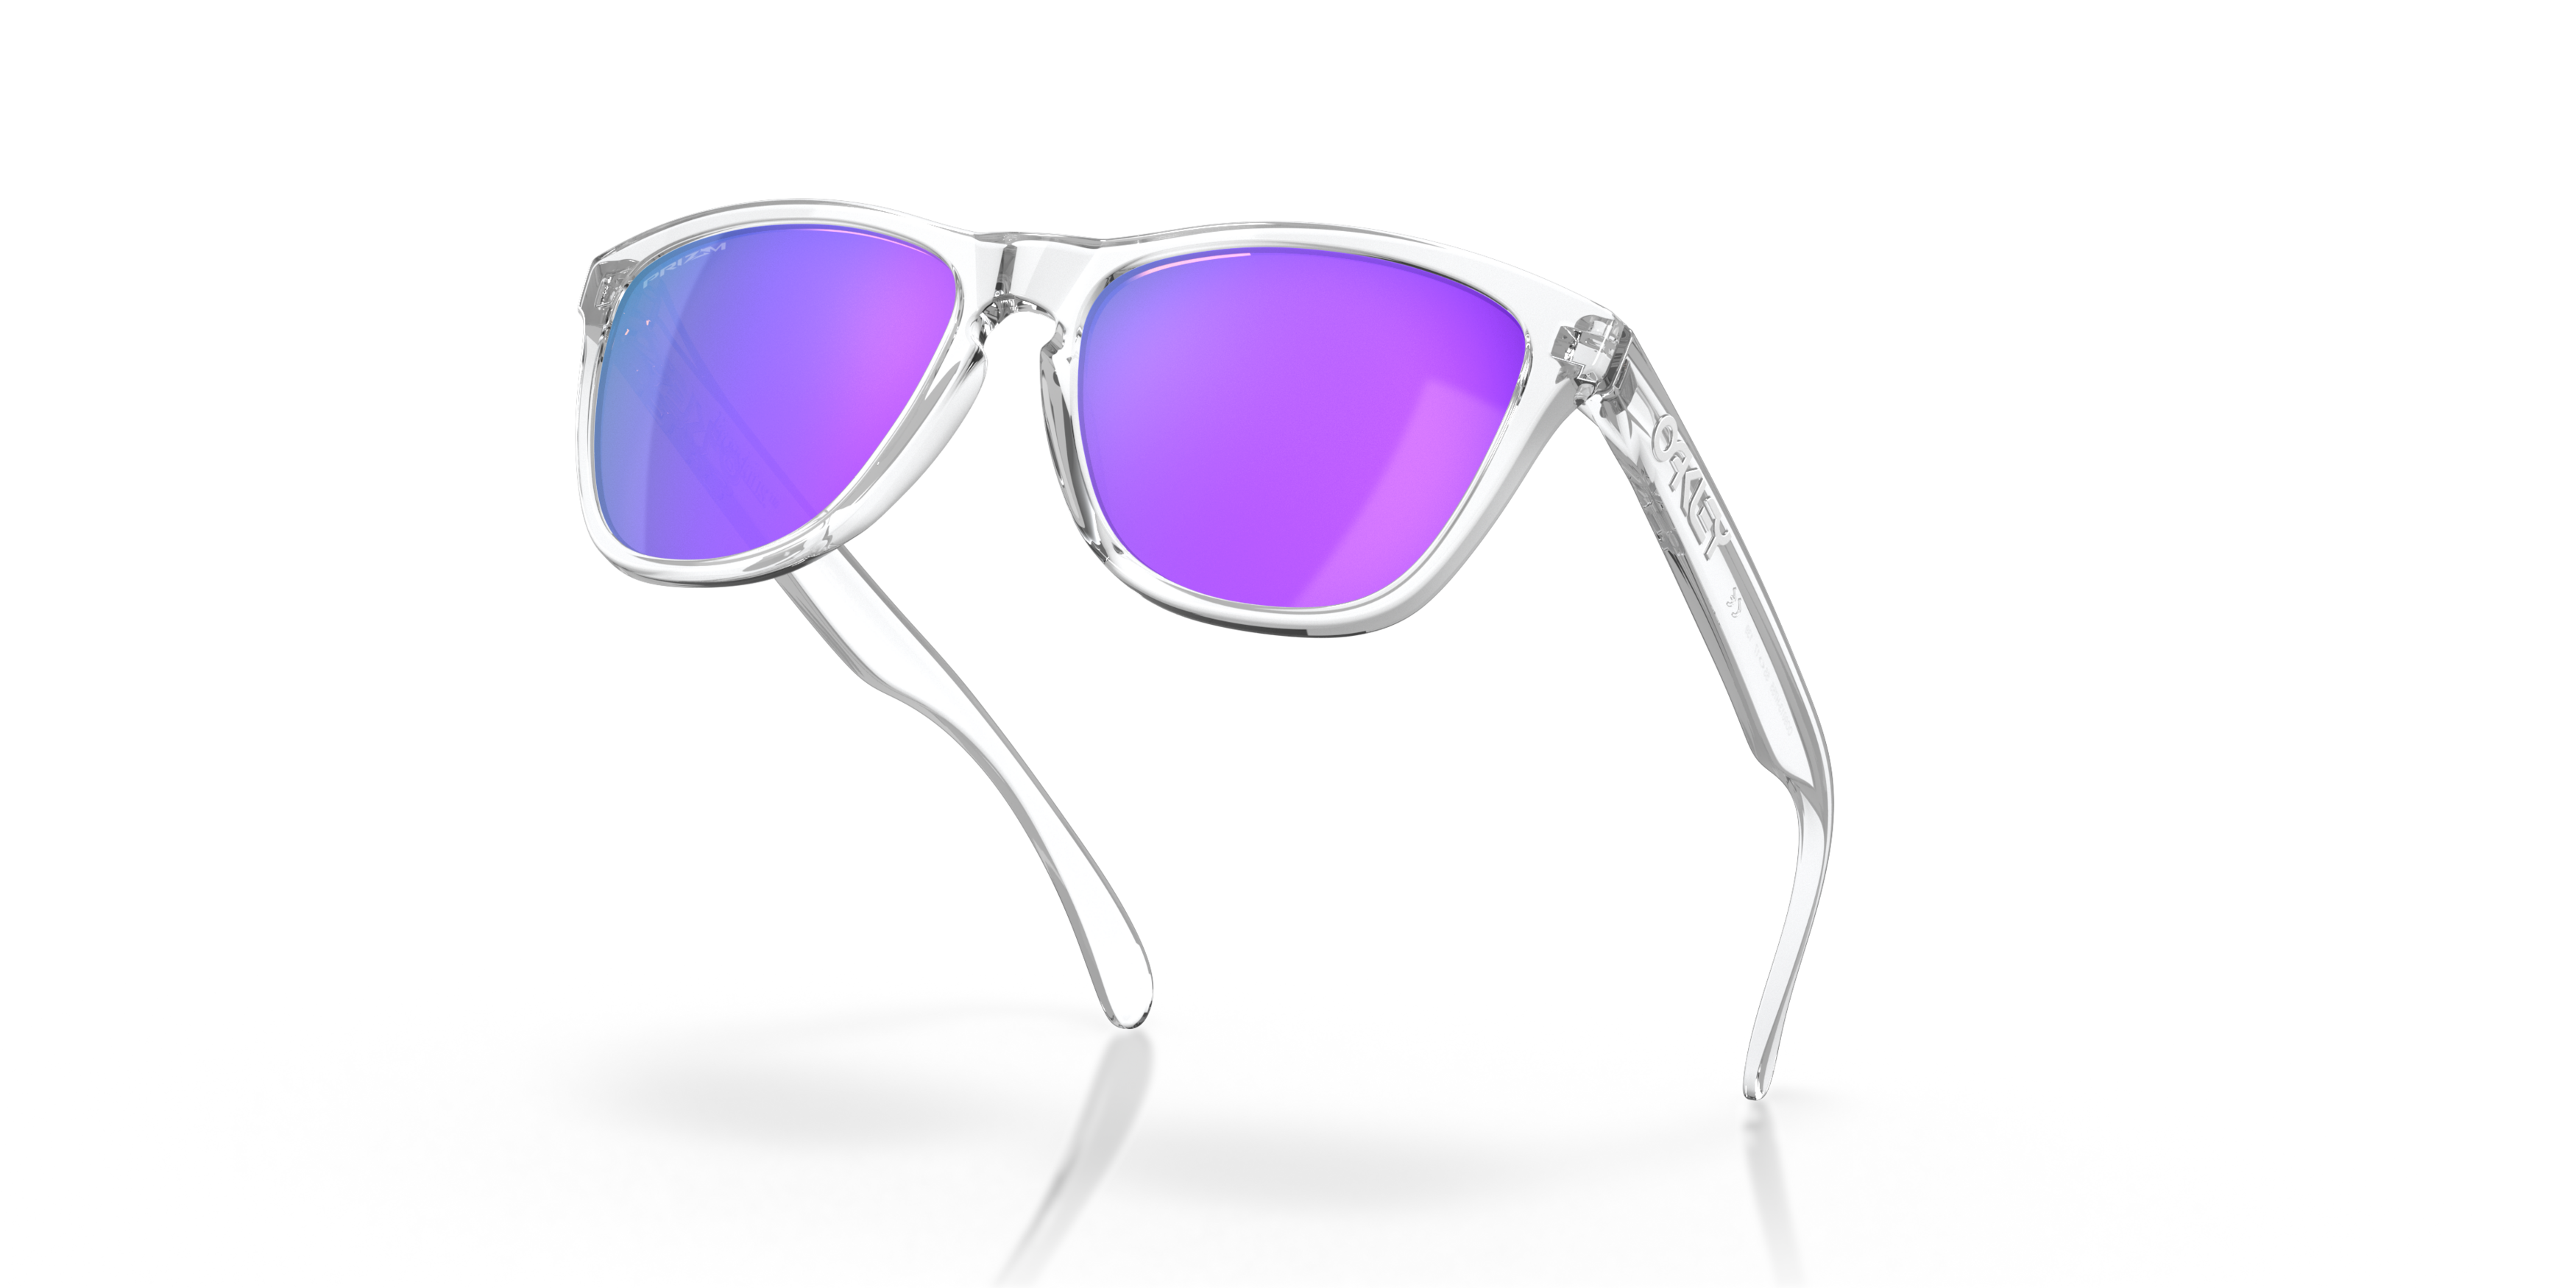 [products.image.bottom_up] Oakley Frogskins OO9013 H755